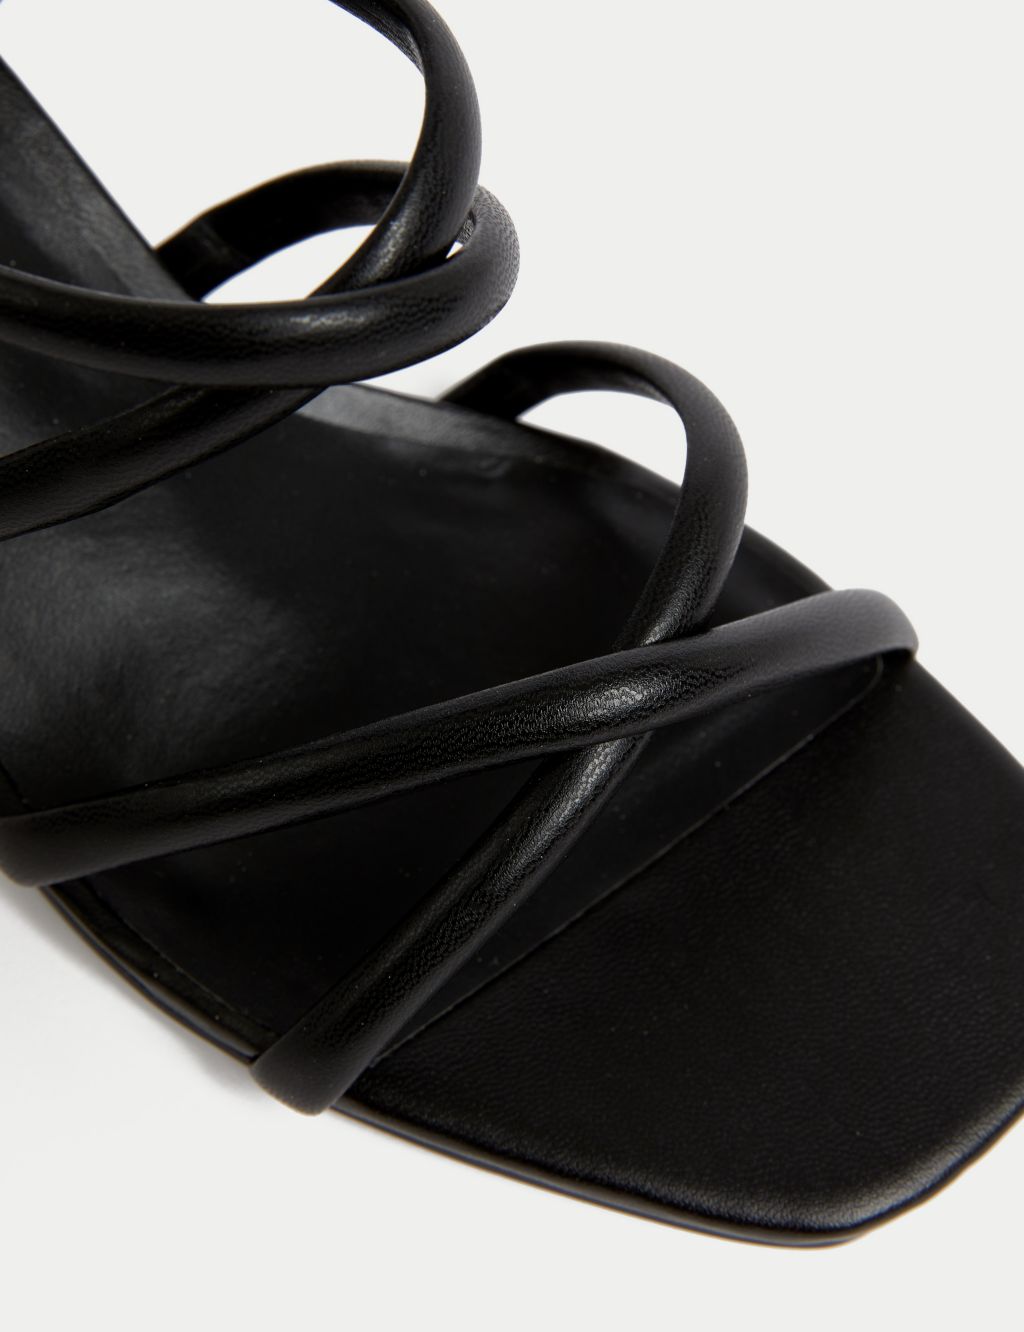 Wide Fit Strappy Block Heel Sandals 2 of 3